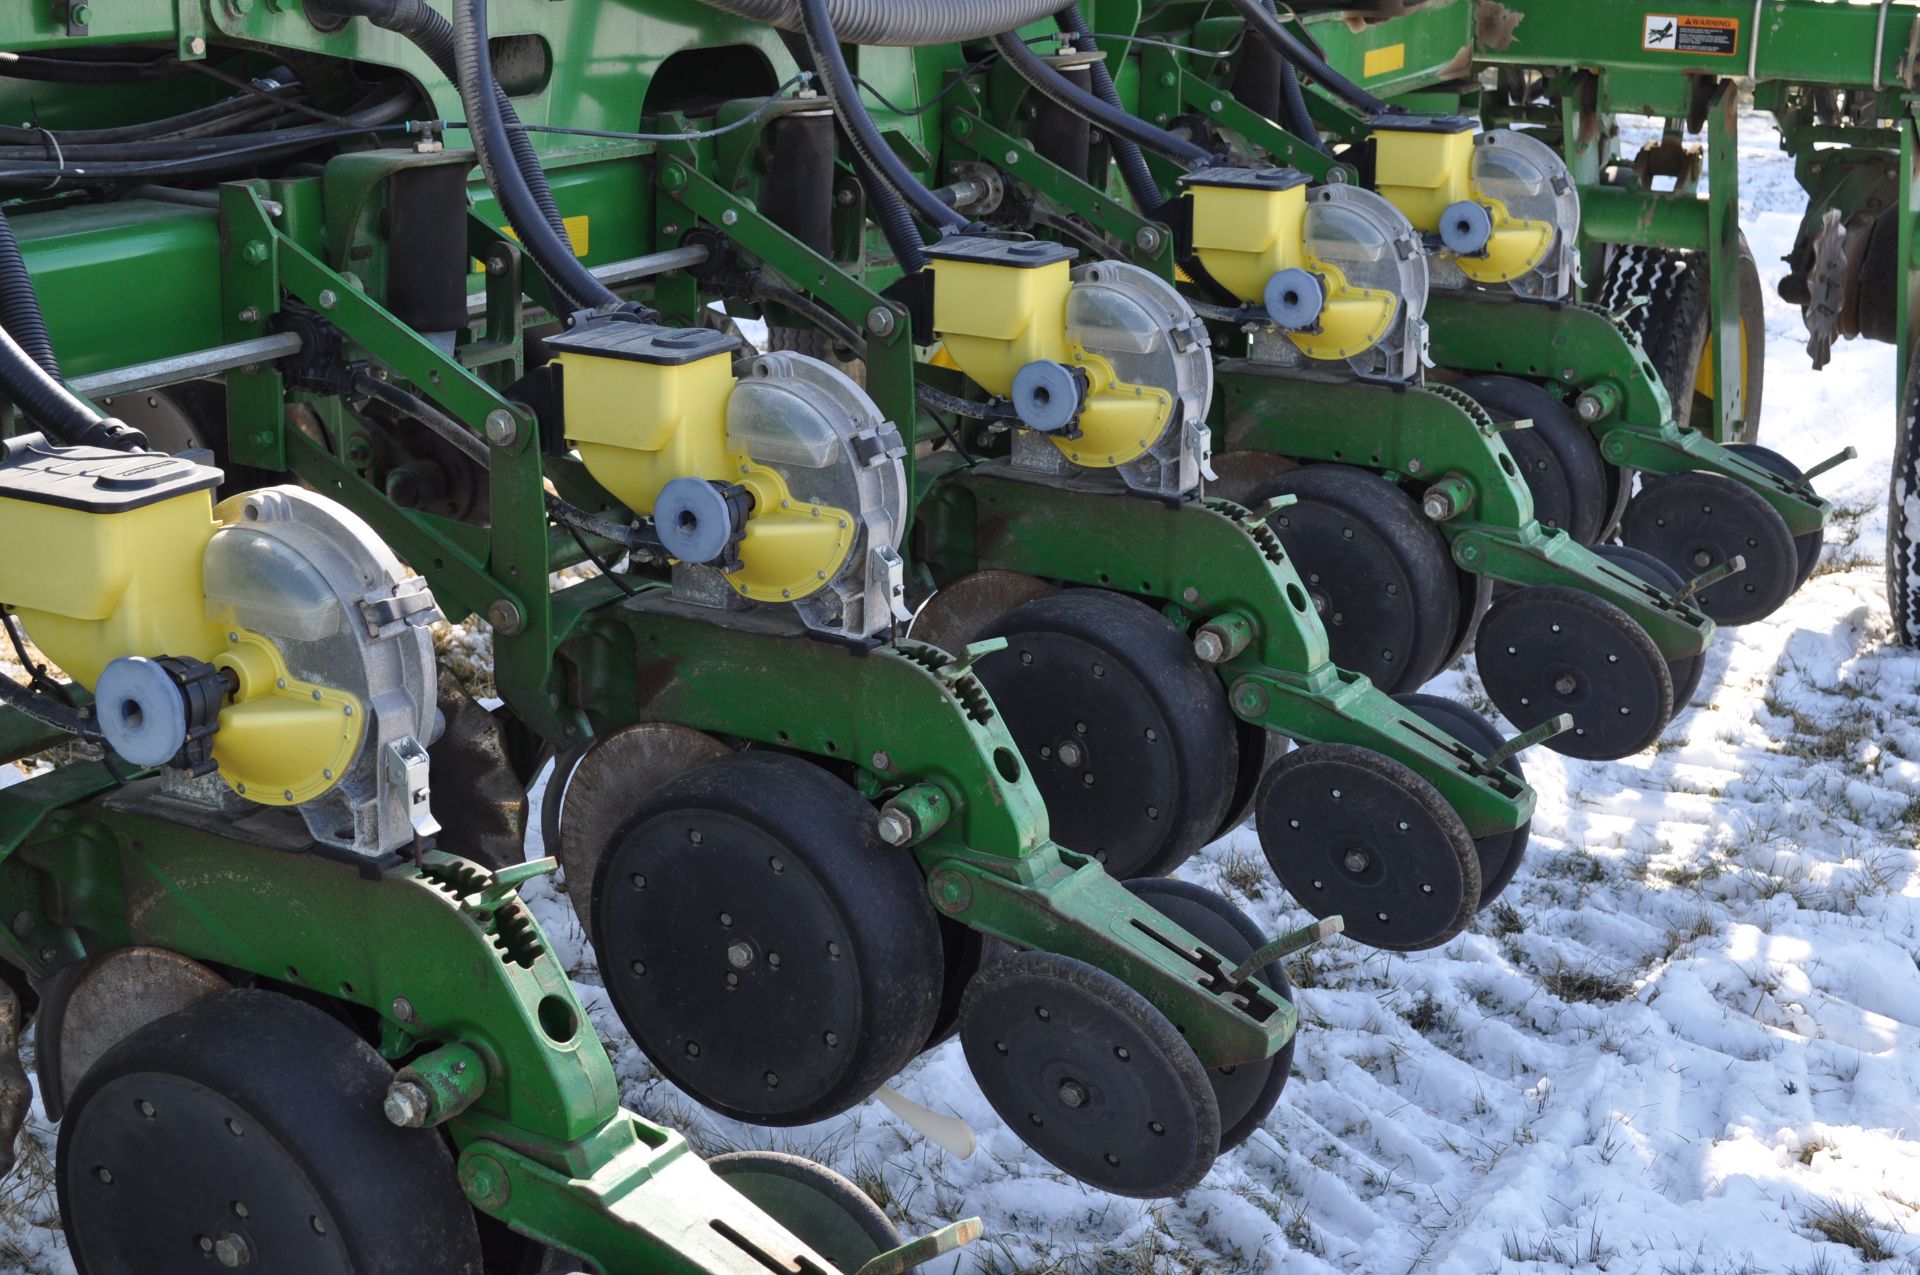 John Deere 1770 NT 24 row 30” planter, front fold, CCS, Refuge Plus tank, markers, no-till coulters, - Image 13 of 25